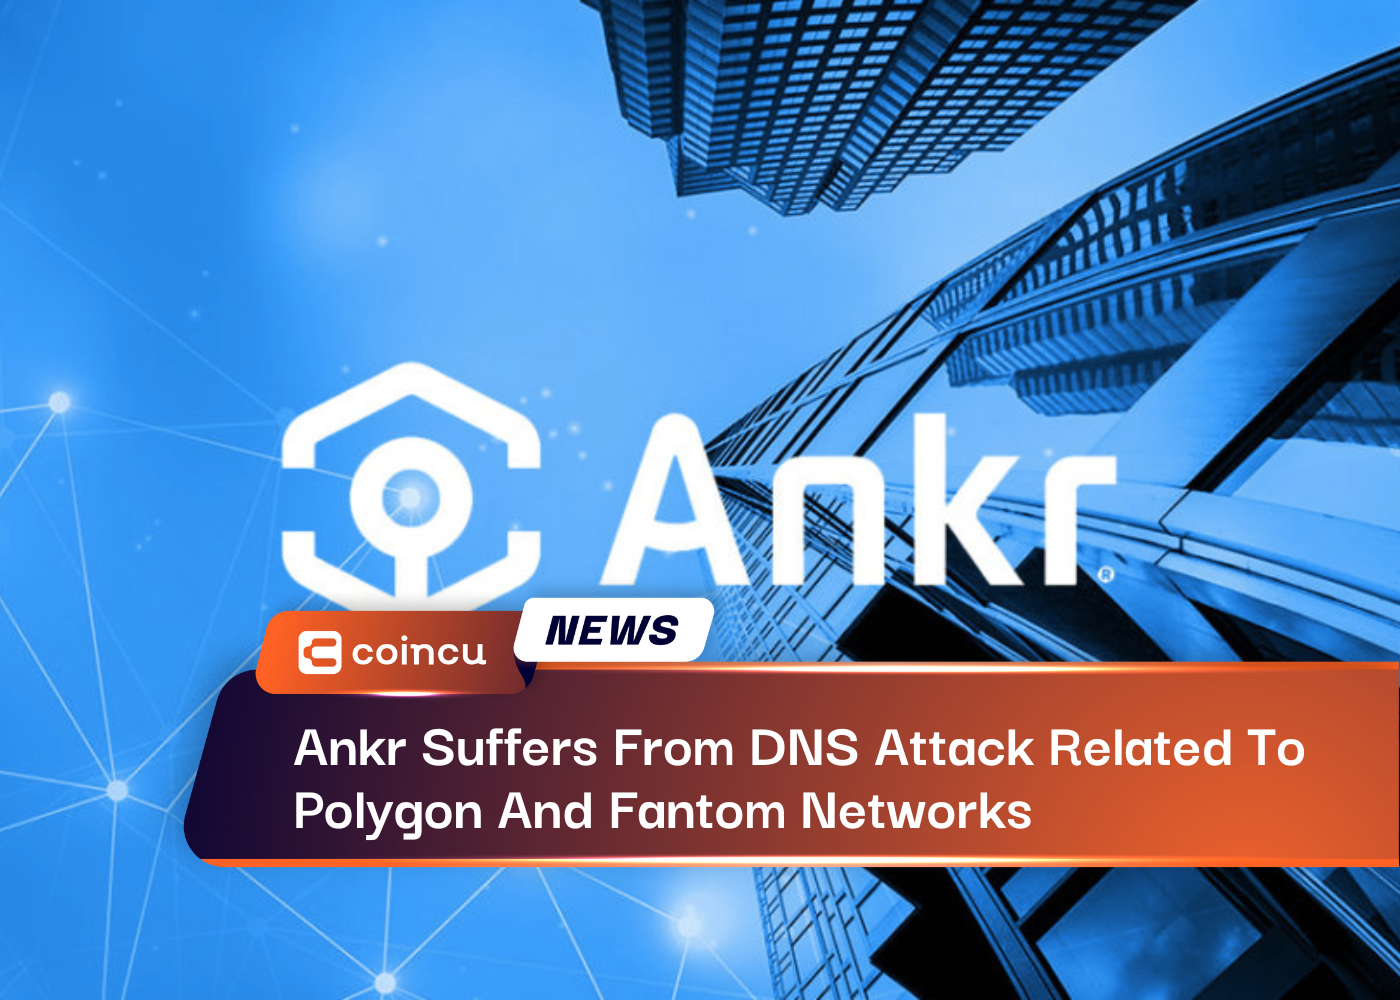 Ankr Suffers From DNS Attack Related To Polygon And Fantom Networks